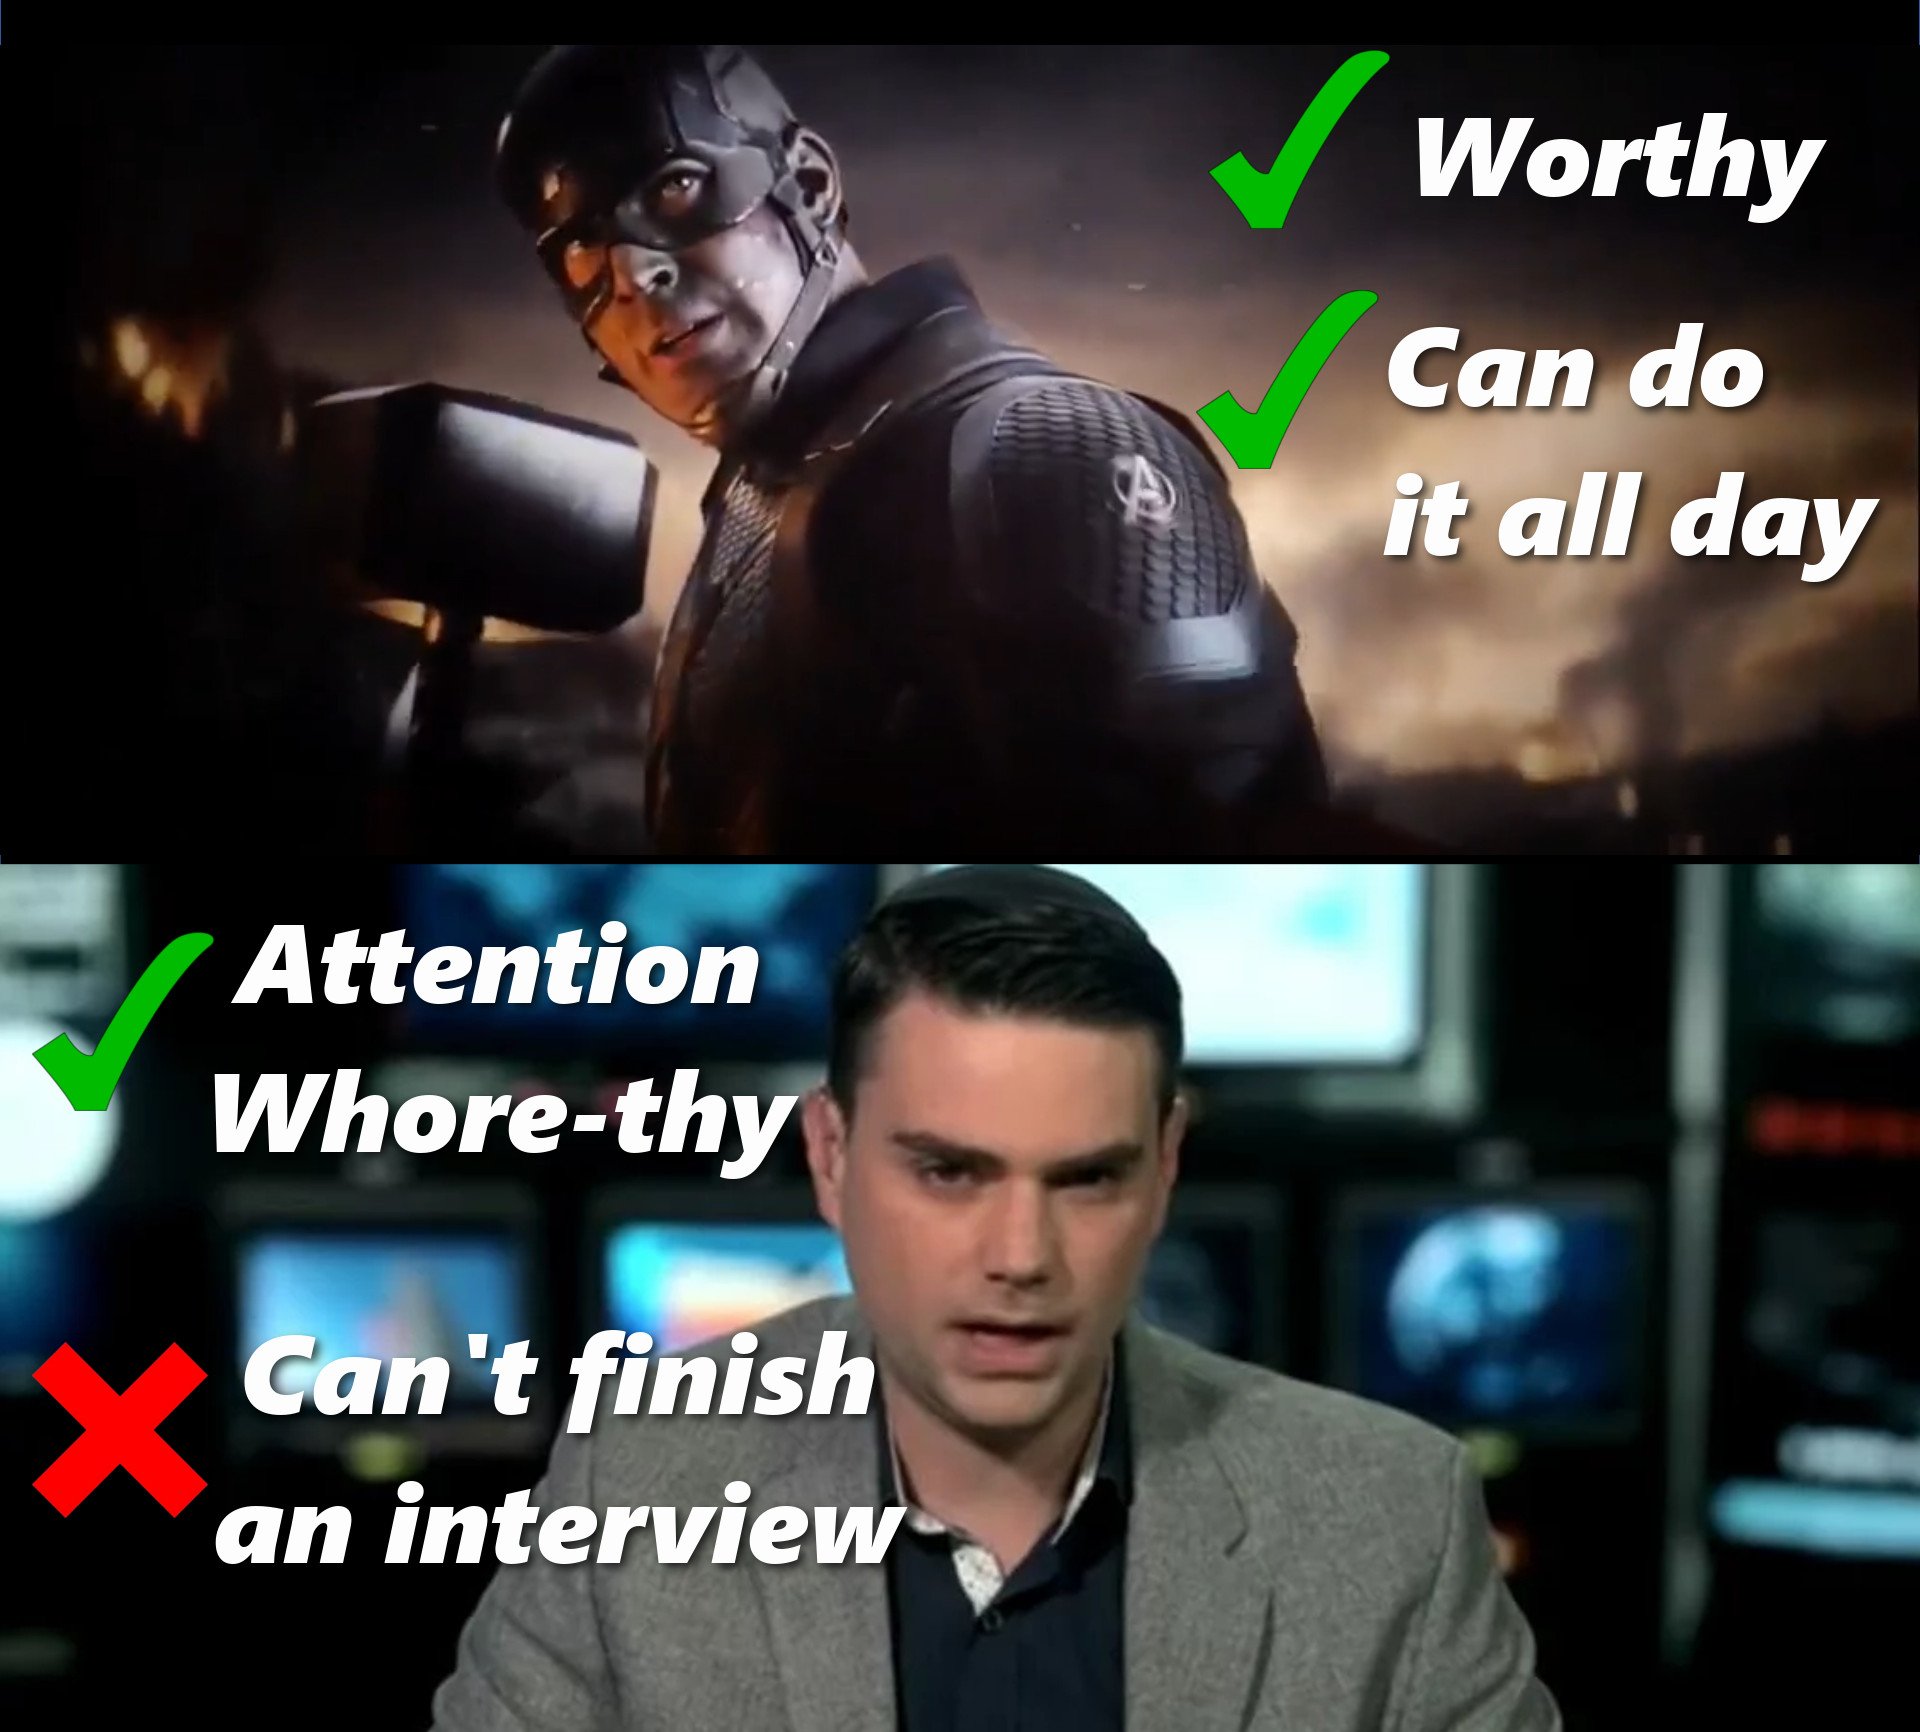 photo caption - Worthy Can do it all day Attention Whorethy Can't finish an interview